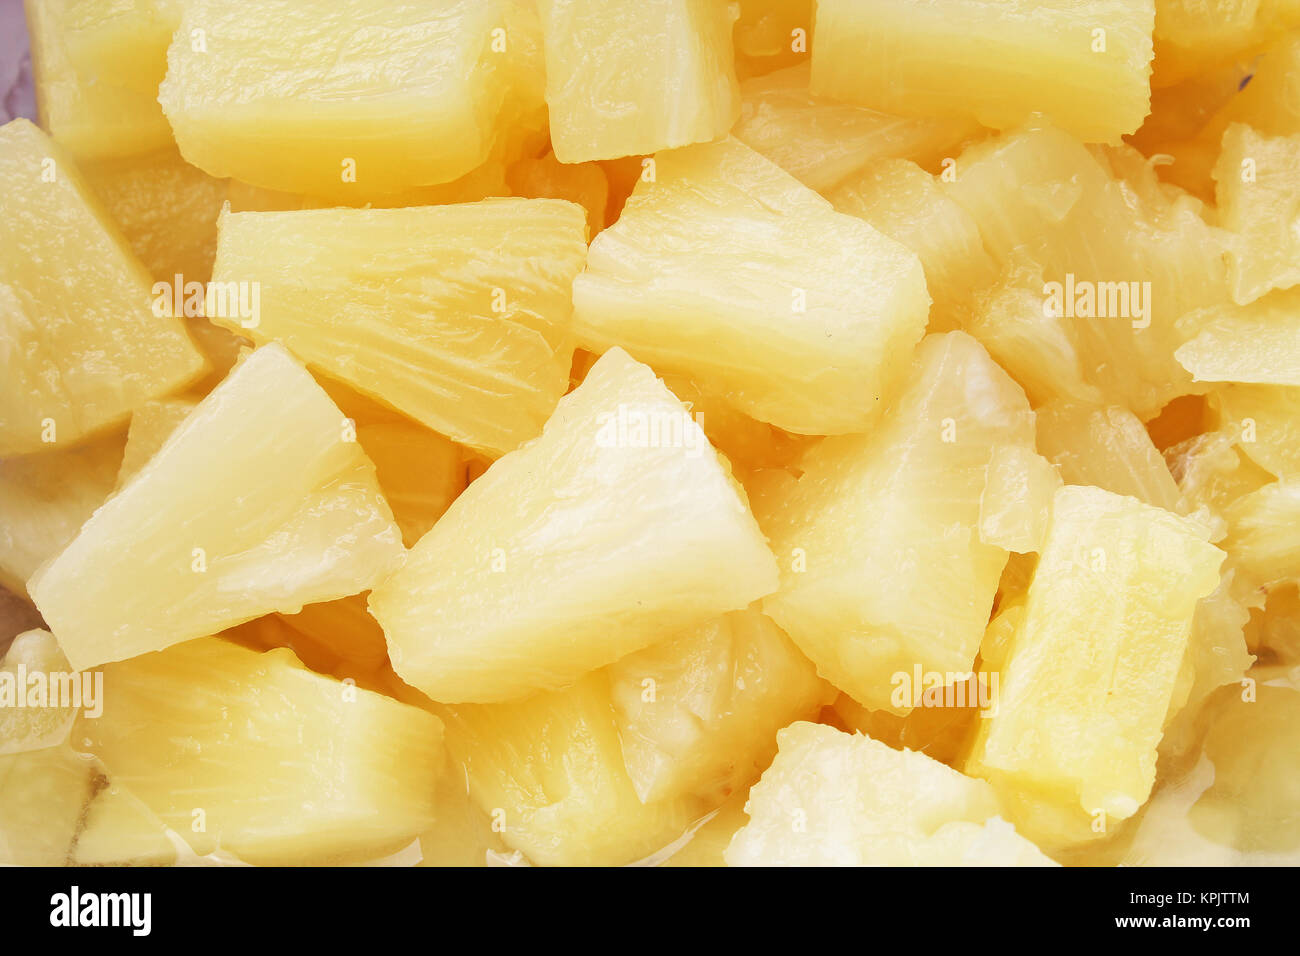 Pineapple slices as background. Yellow pineapples texture pattern. Pineapple fruit. Stock Photo